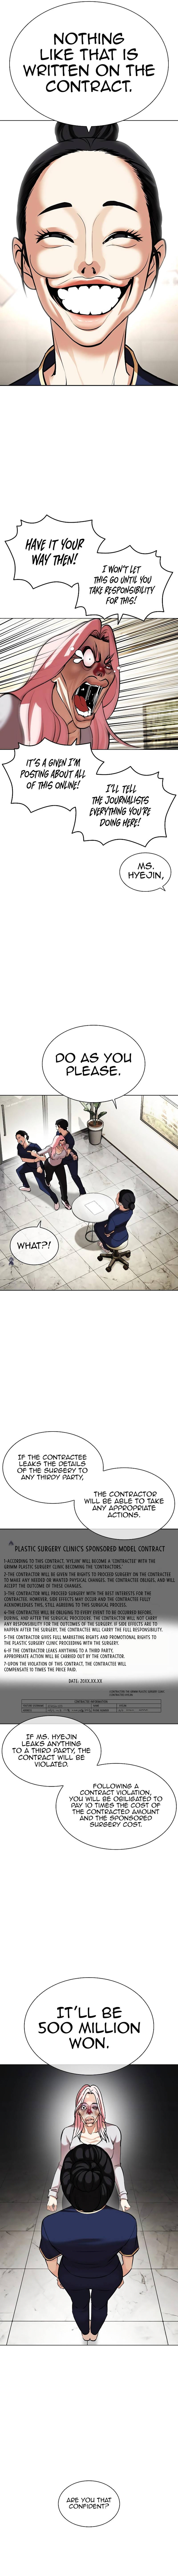 Lookism, Chapter 445